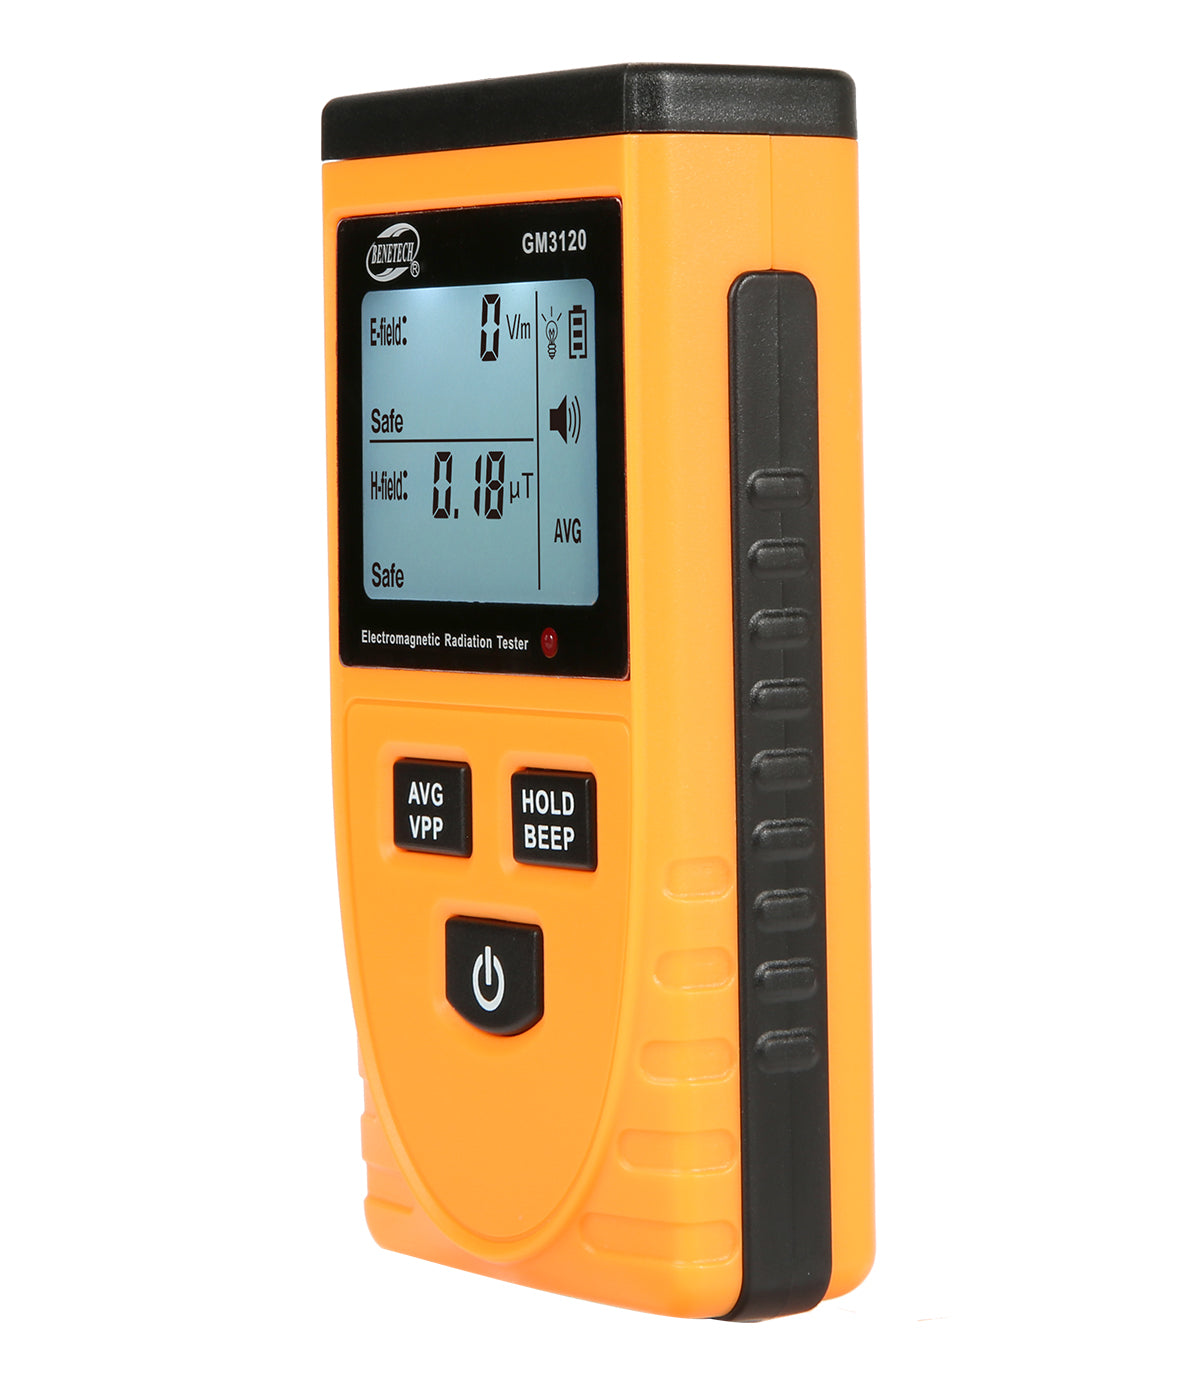 Benetech GM3120 Electromagnetic Radiation Tester Detector Measuring Instrument Dual Phone Monitoring with LCD Display